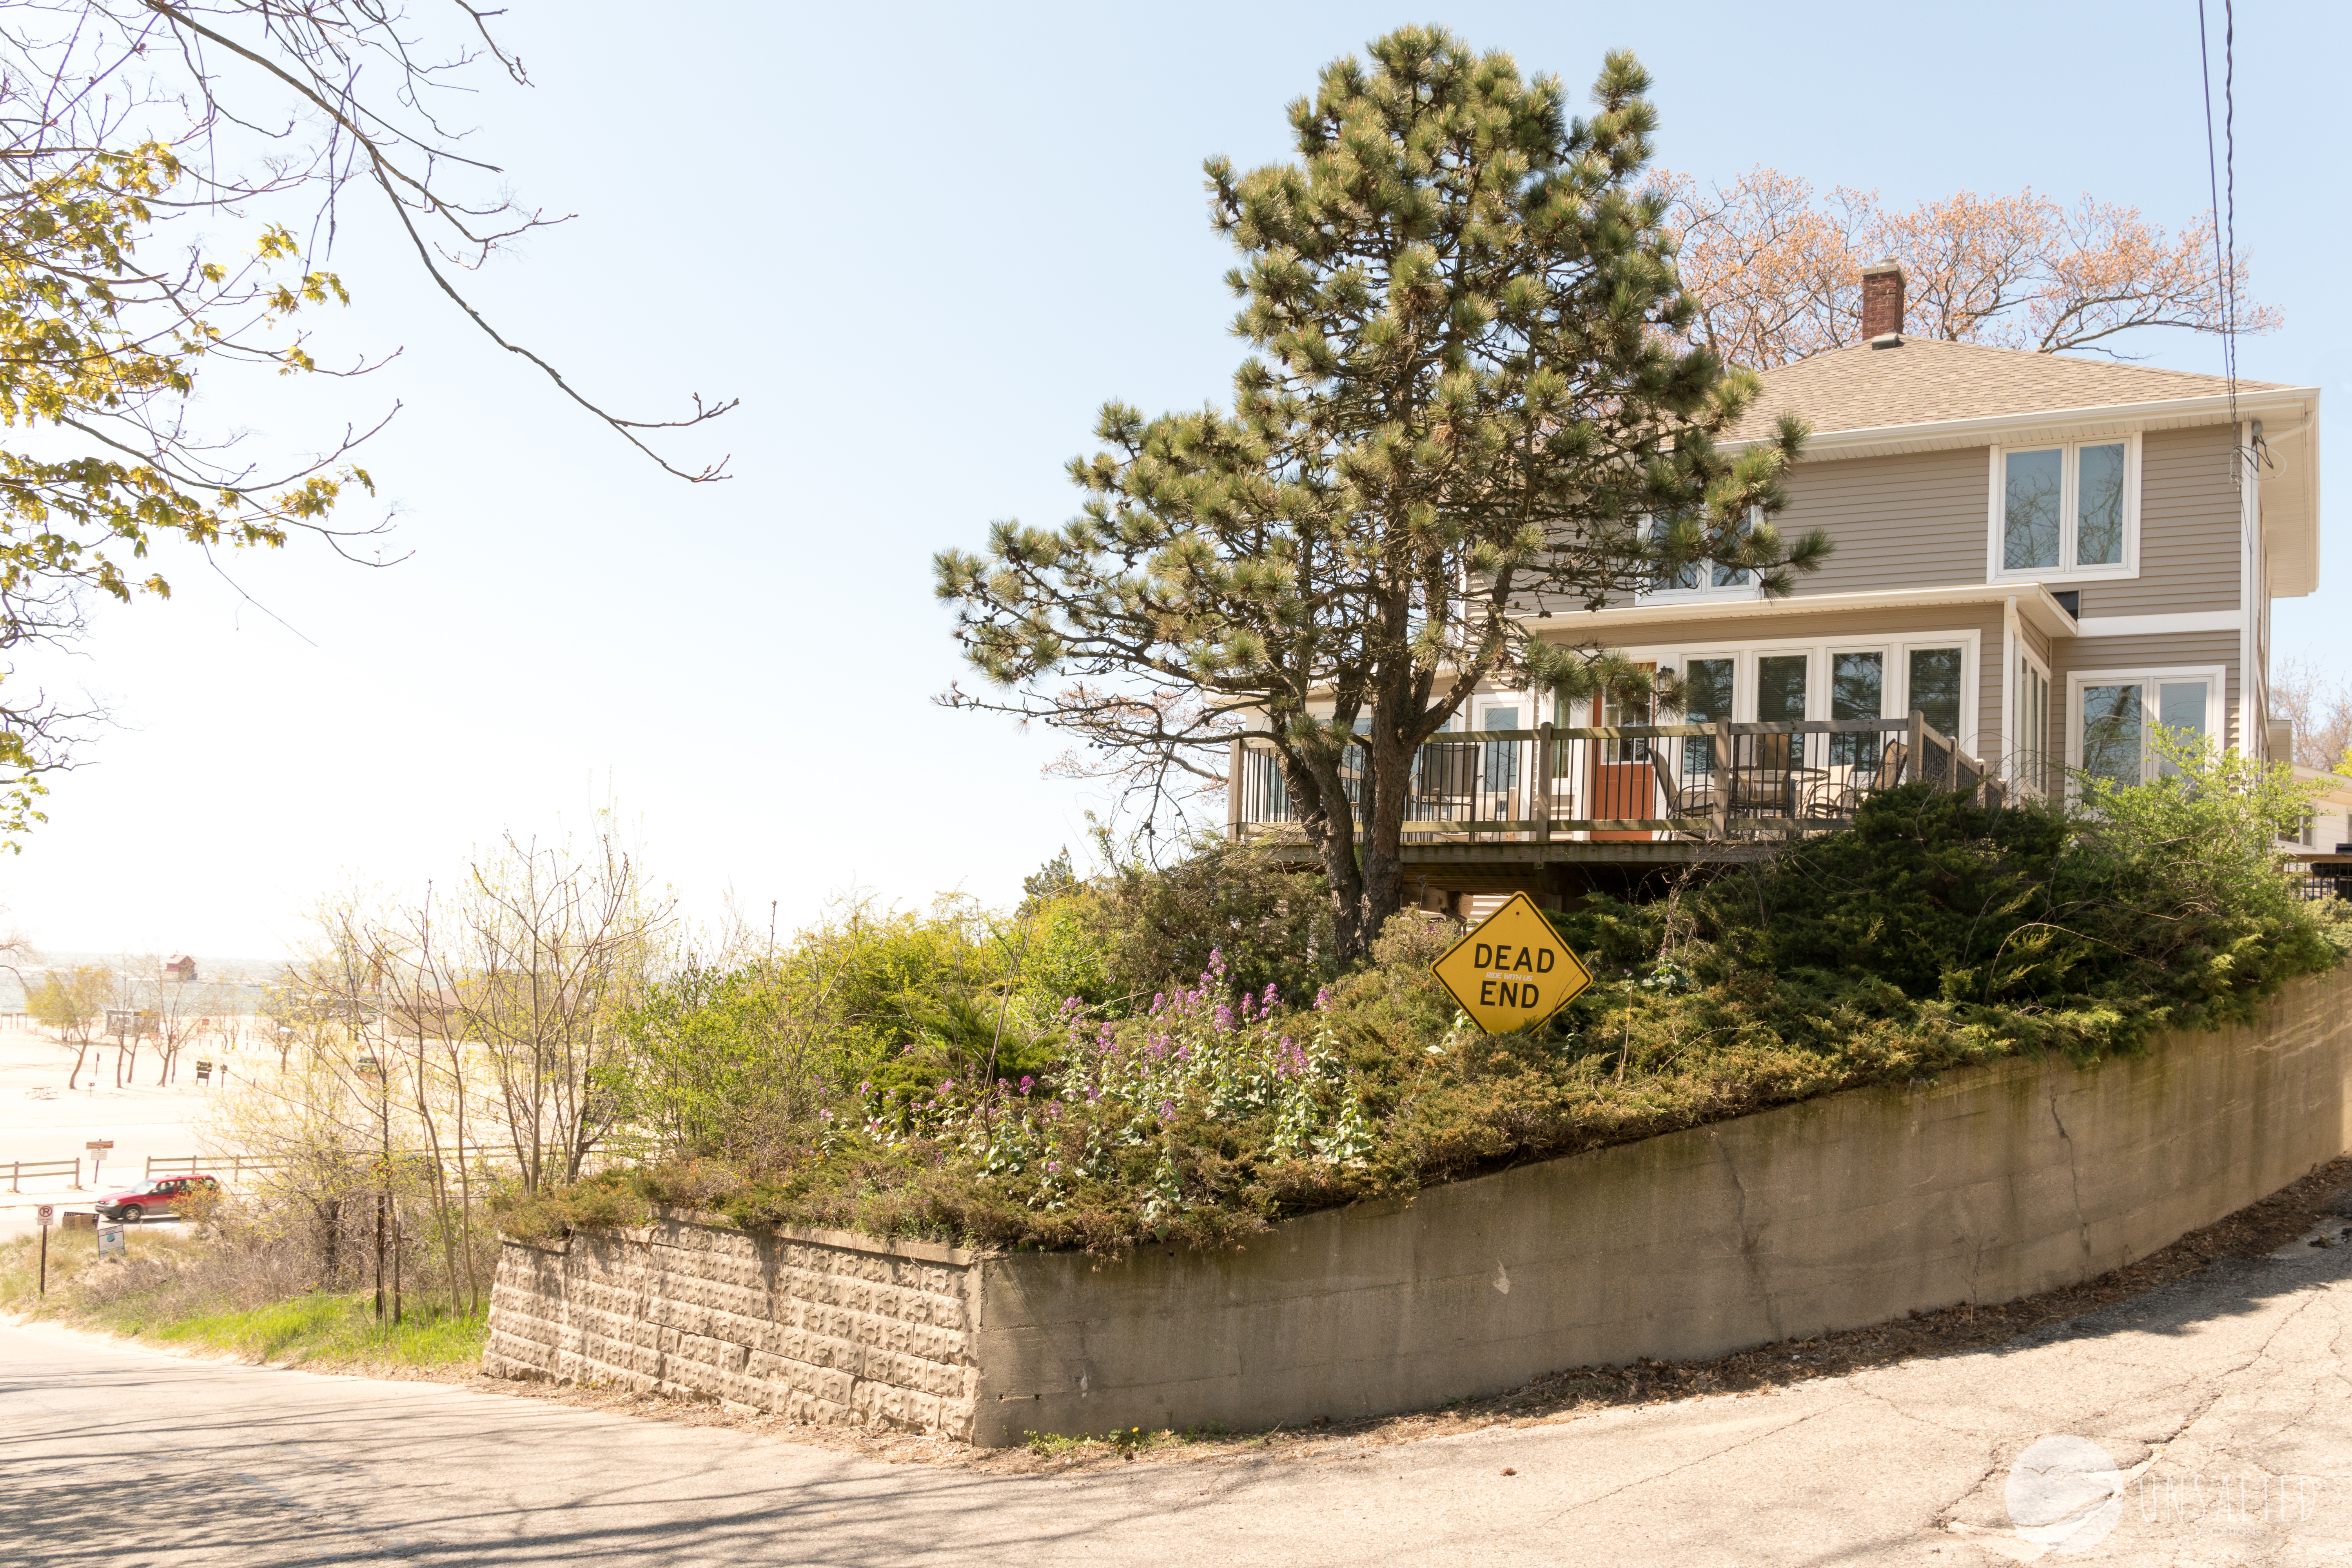 Happe House is perched in the dune across from the Grand Haven State Park and Beach.